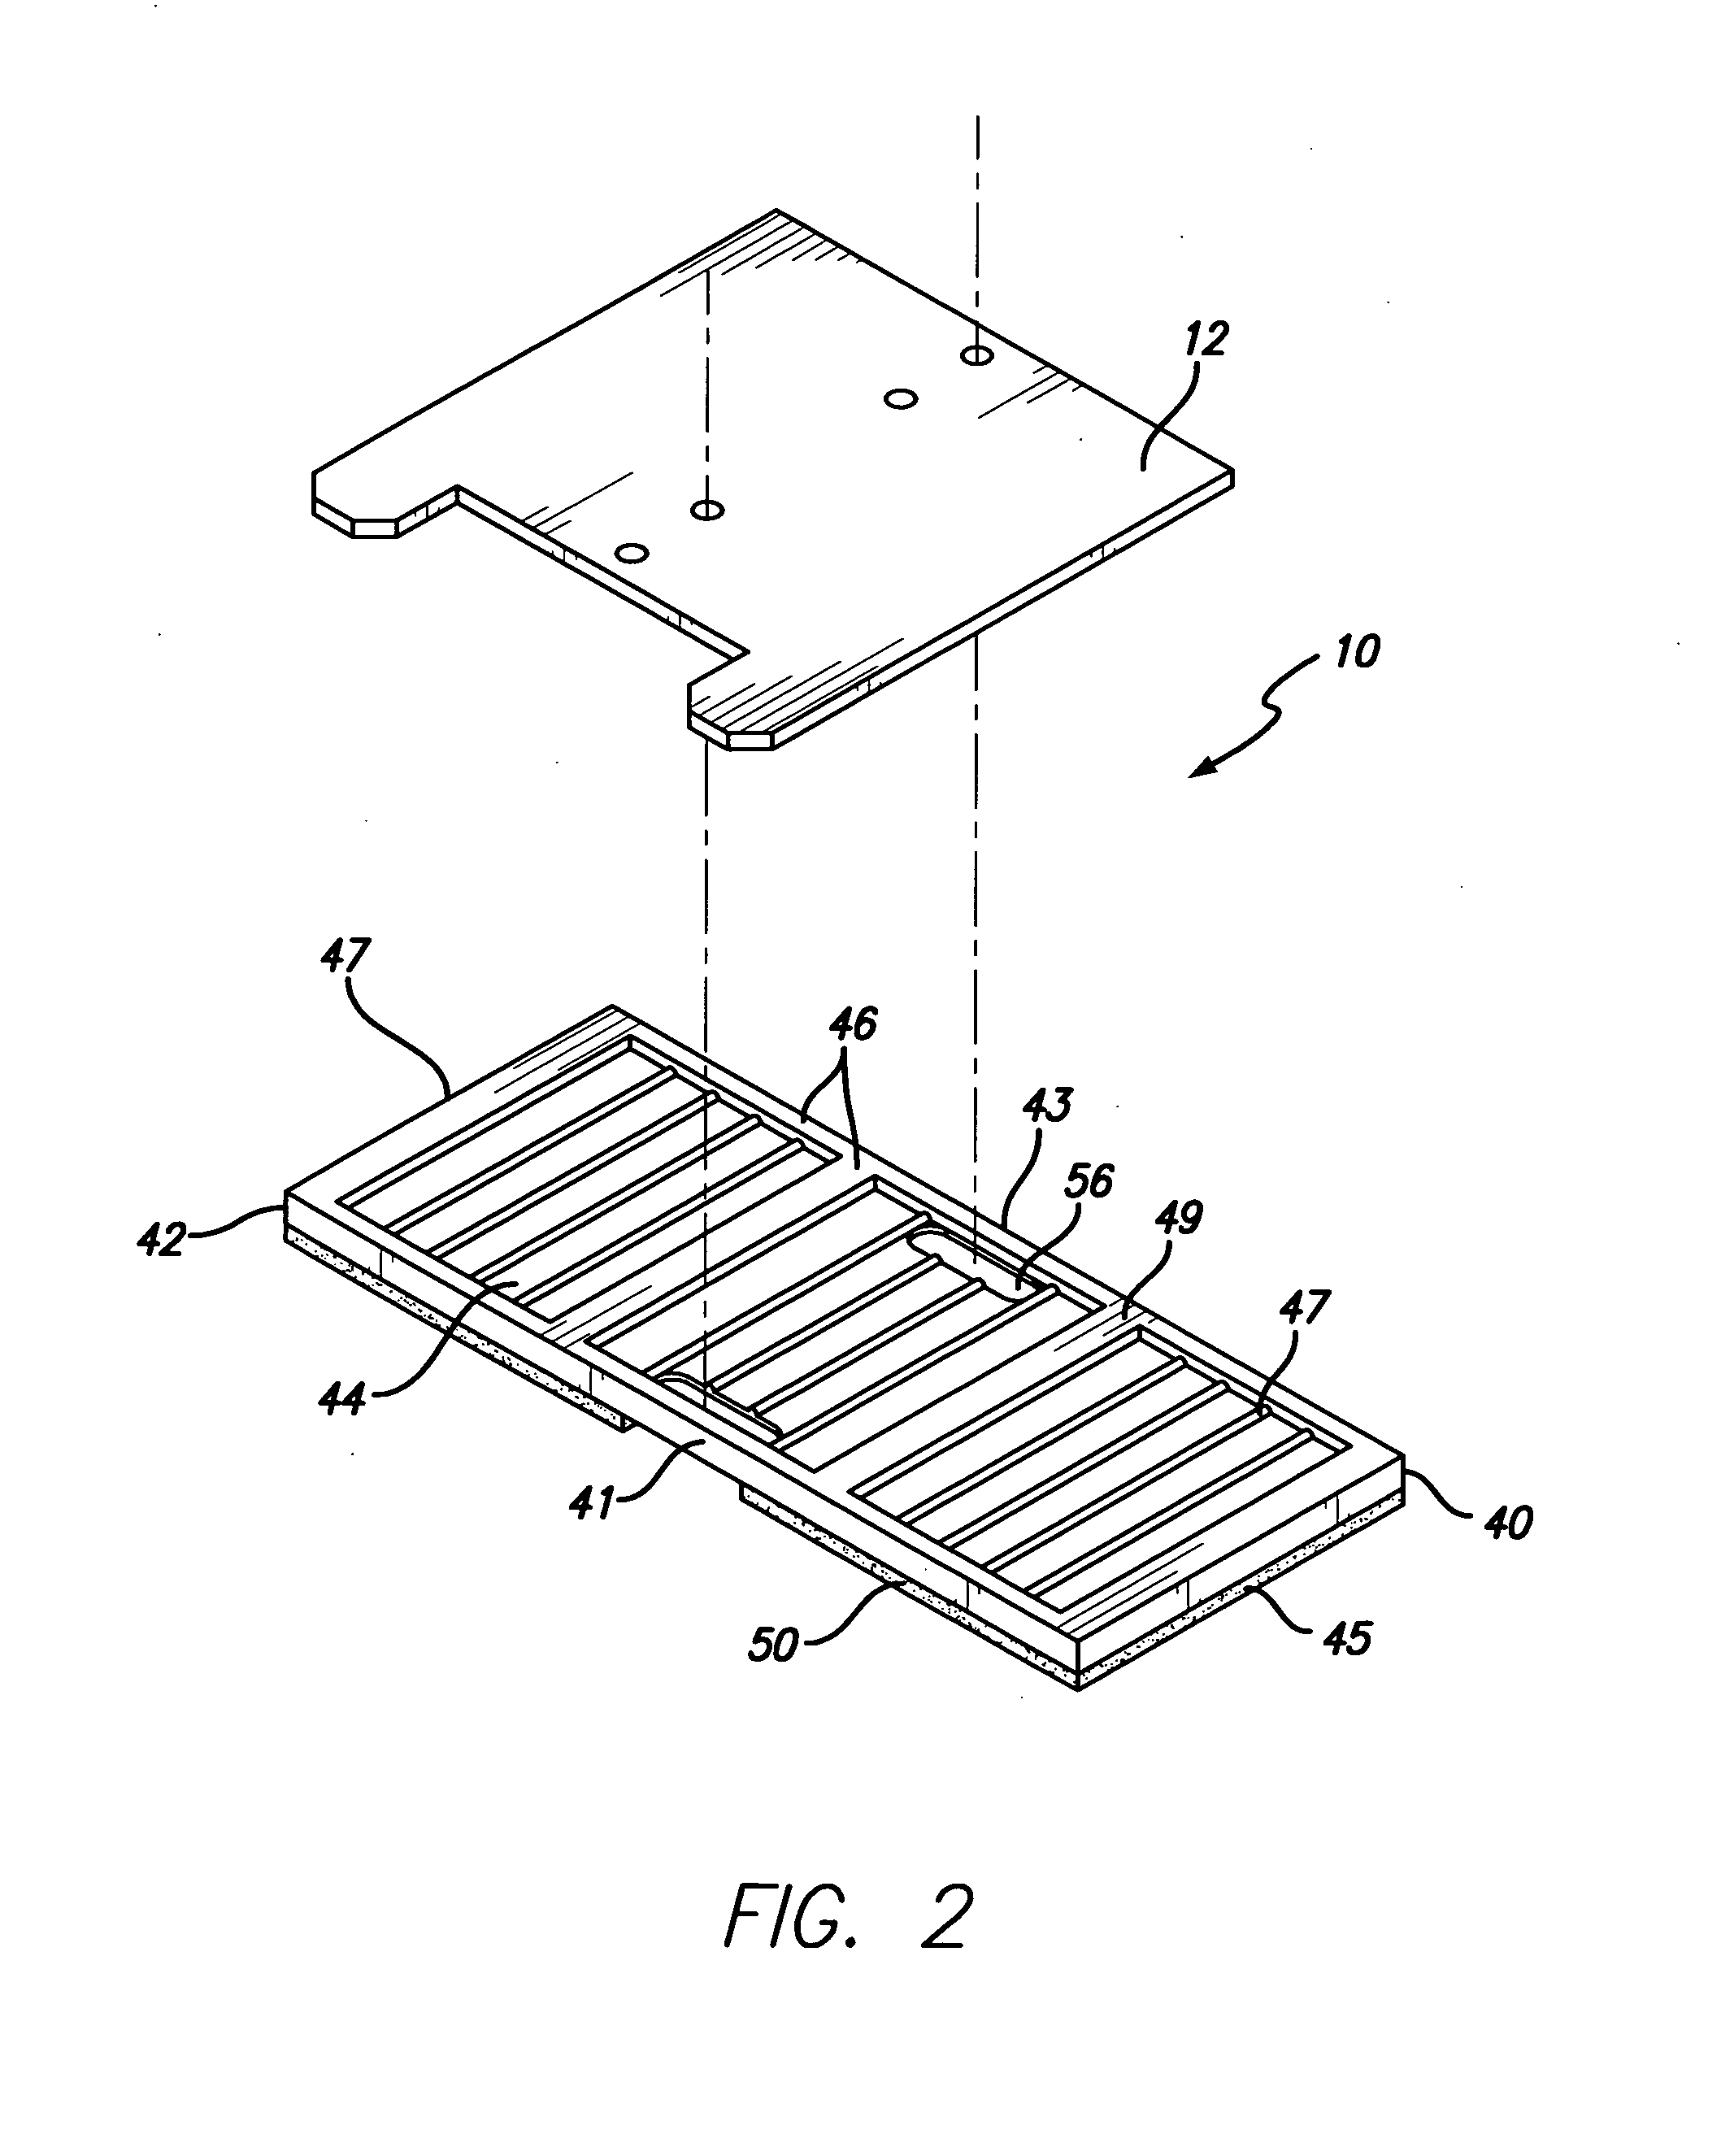 Ladder support device